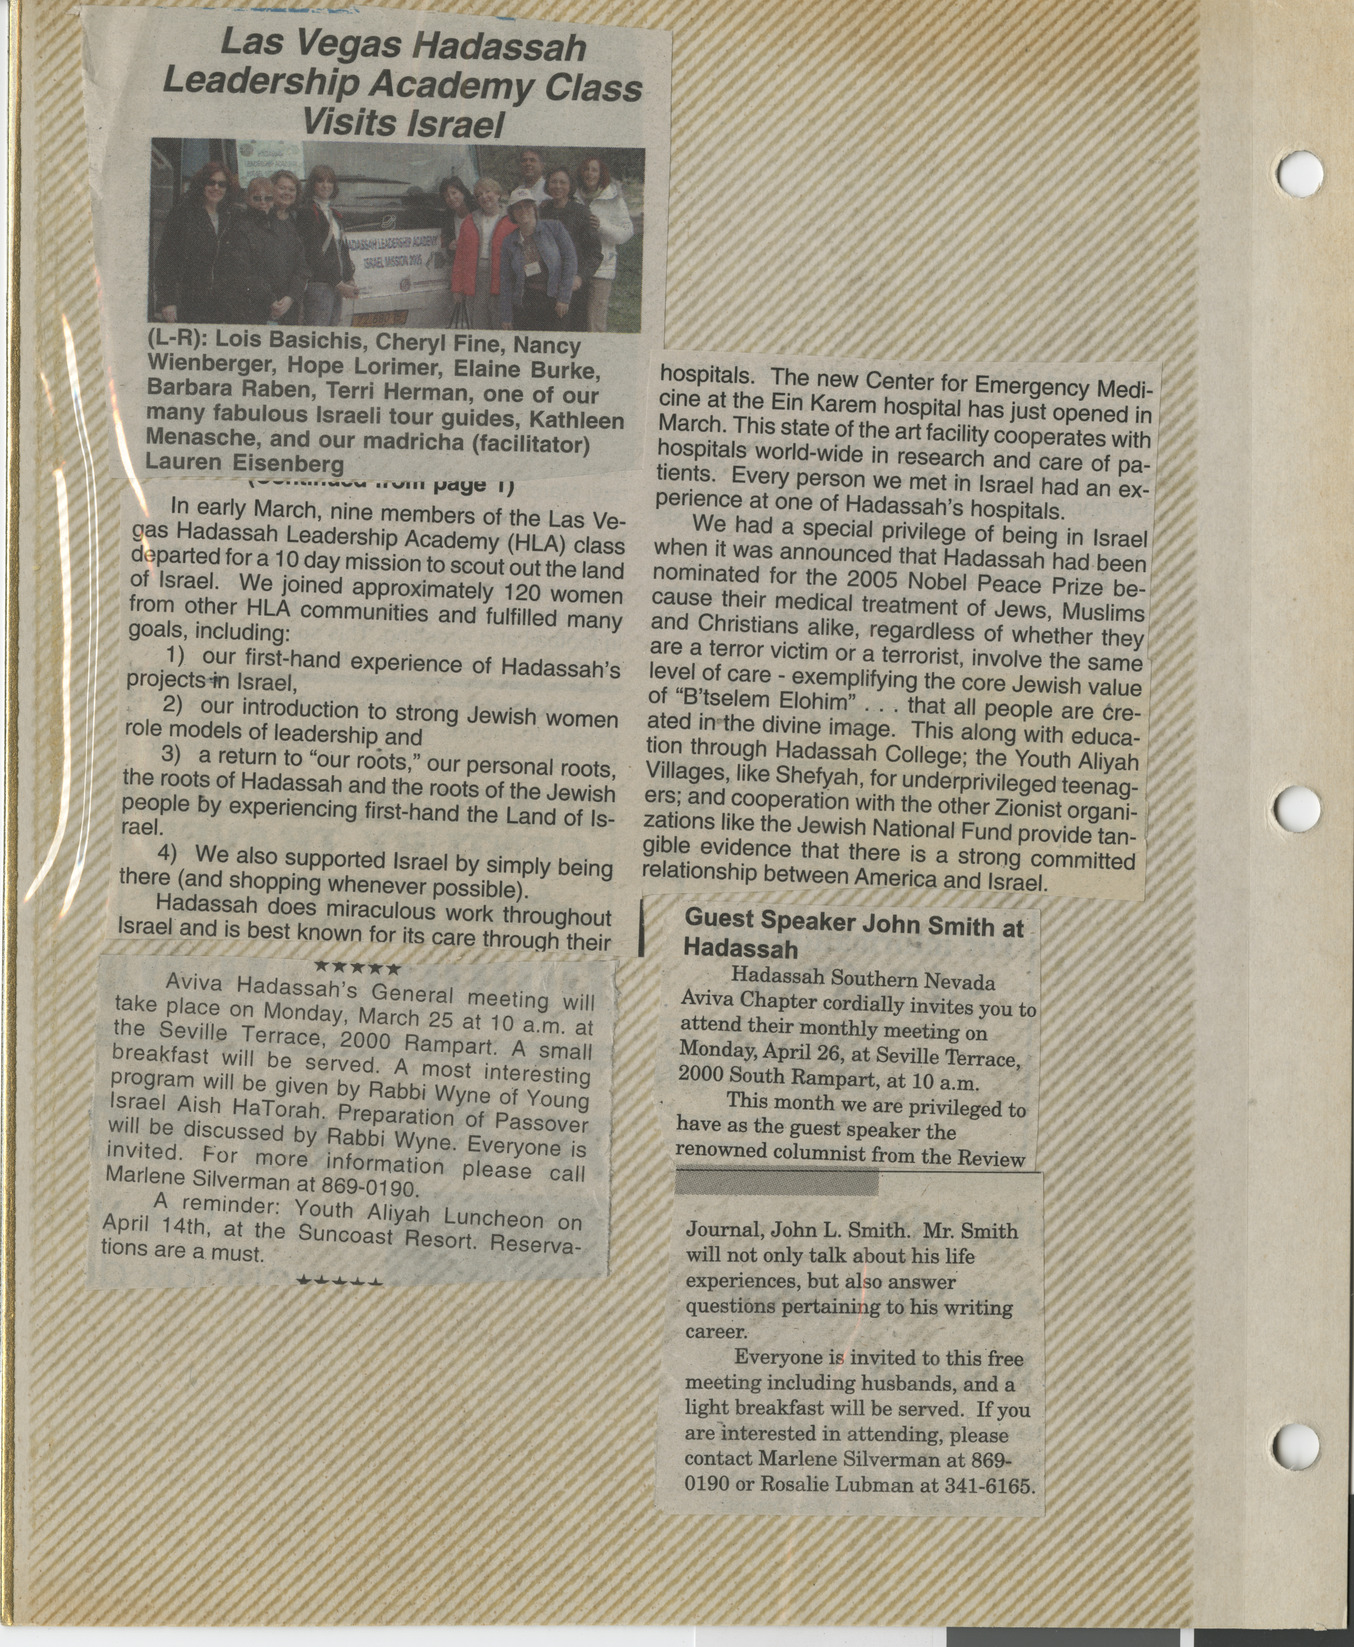 Newspaper clippings about Hadassah chapter events, date unknown